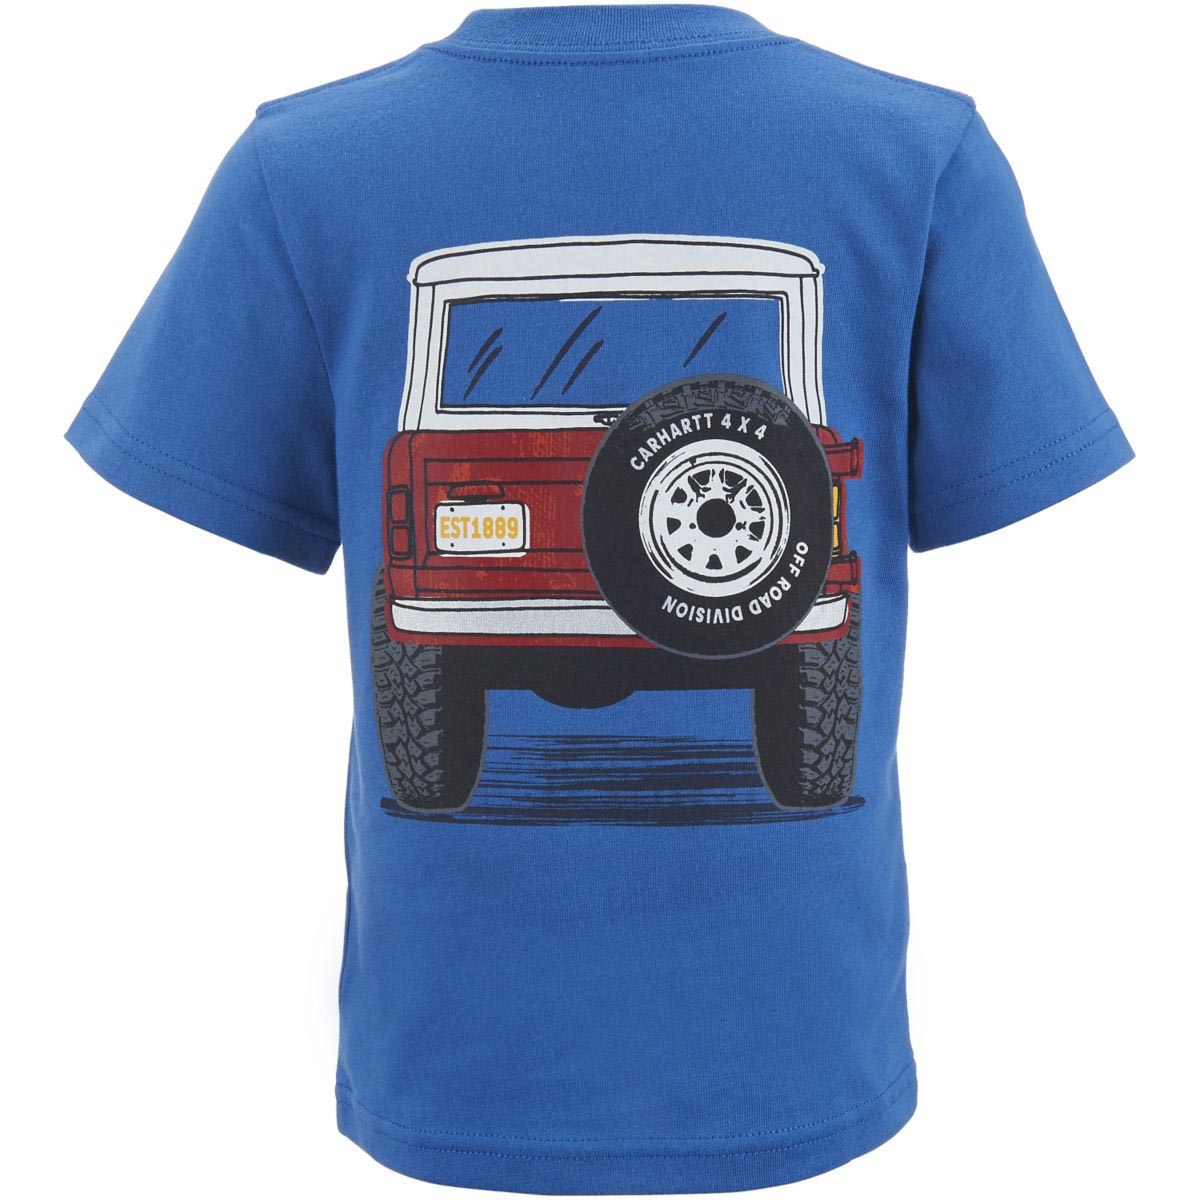 Carhartt Infant Toddler and Boys Retro Vehicle Tee